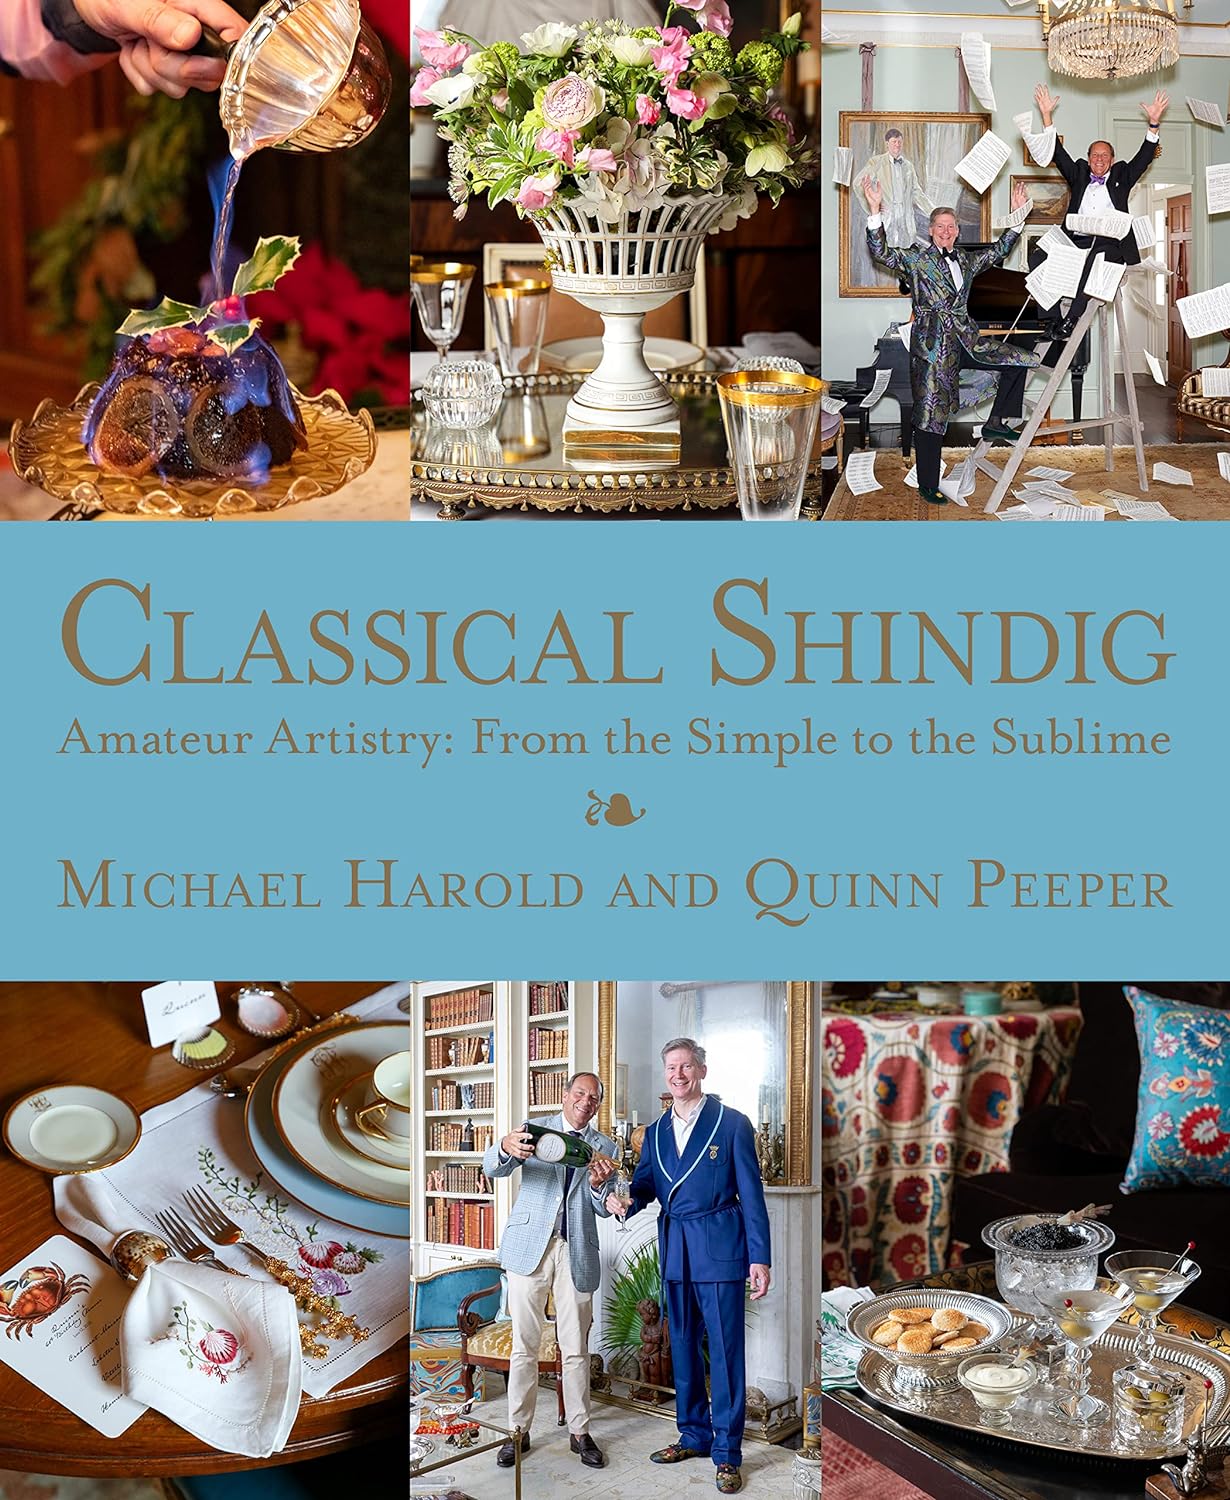 Classical Shindig (Susan Schadt Press, 2023) by Michael Harold and Quinn Peeper - book cover image. #classicalshindig